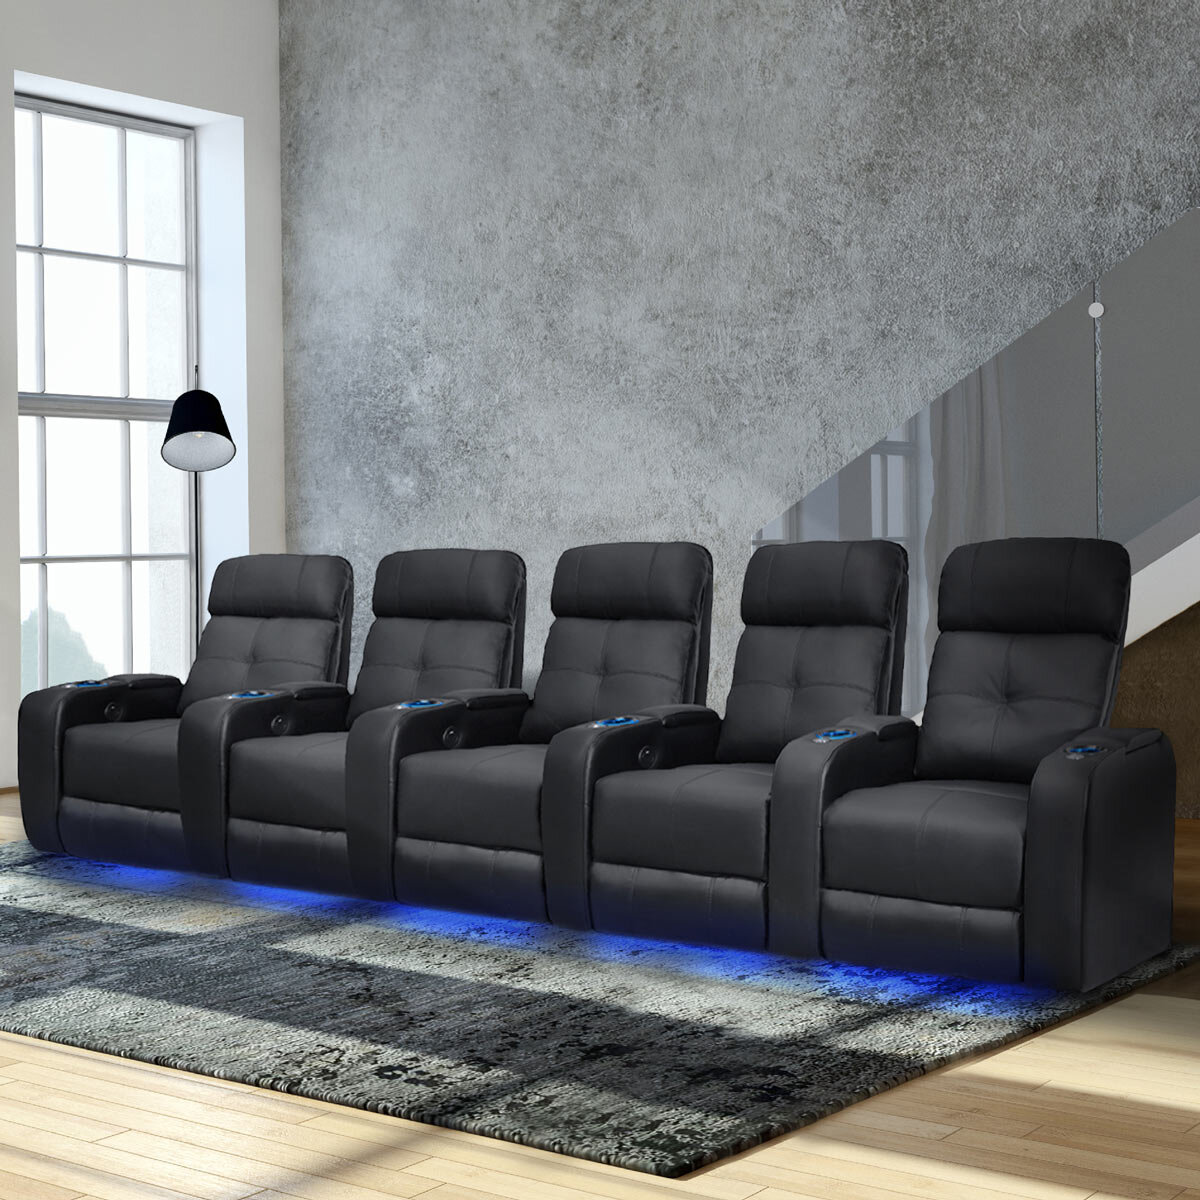 Valencia Home Theatre Seating Verona Row of 5 Chairs, Black